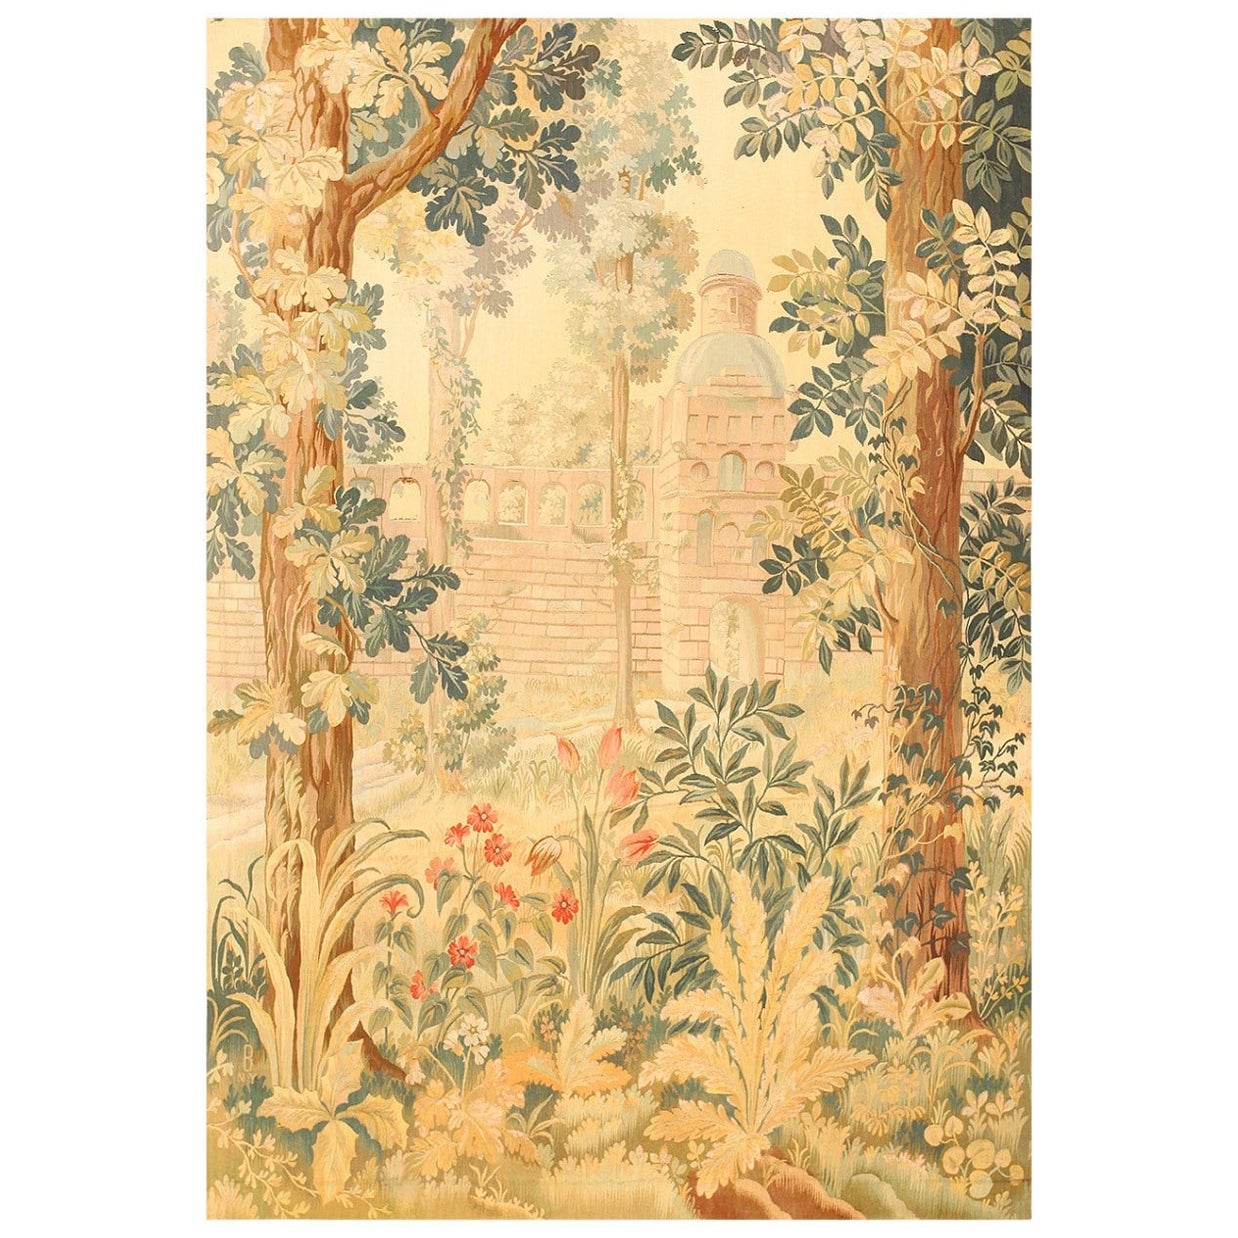 Antique Floral Design And Soft Colored Rare American Tapestry 4'9" x 6'10" For Sale